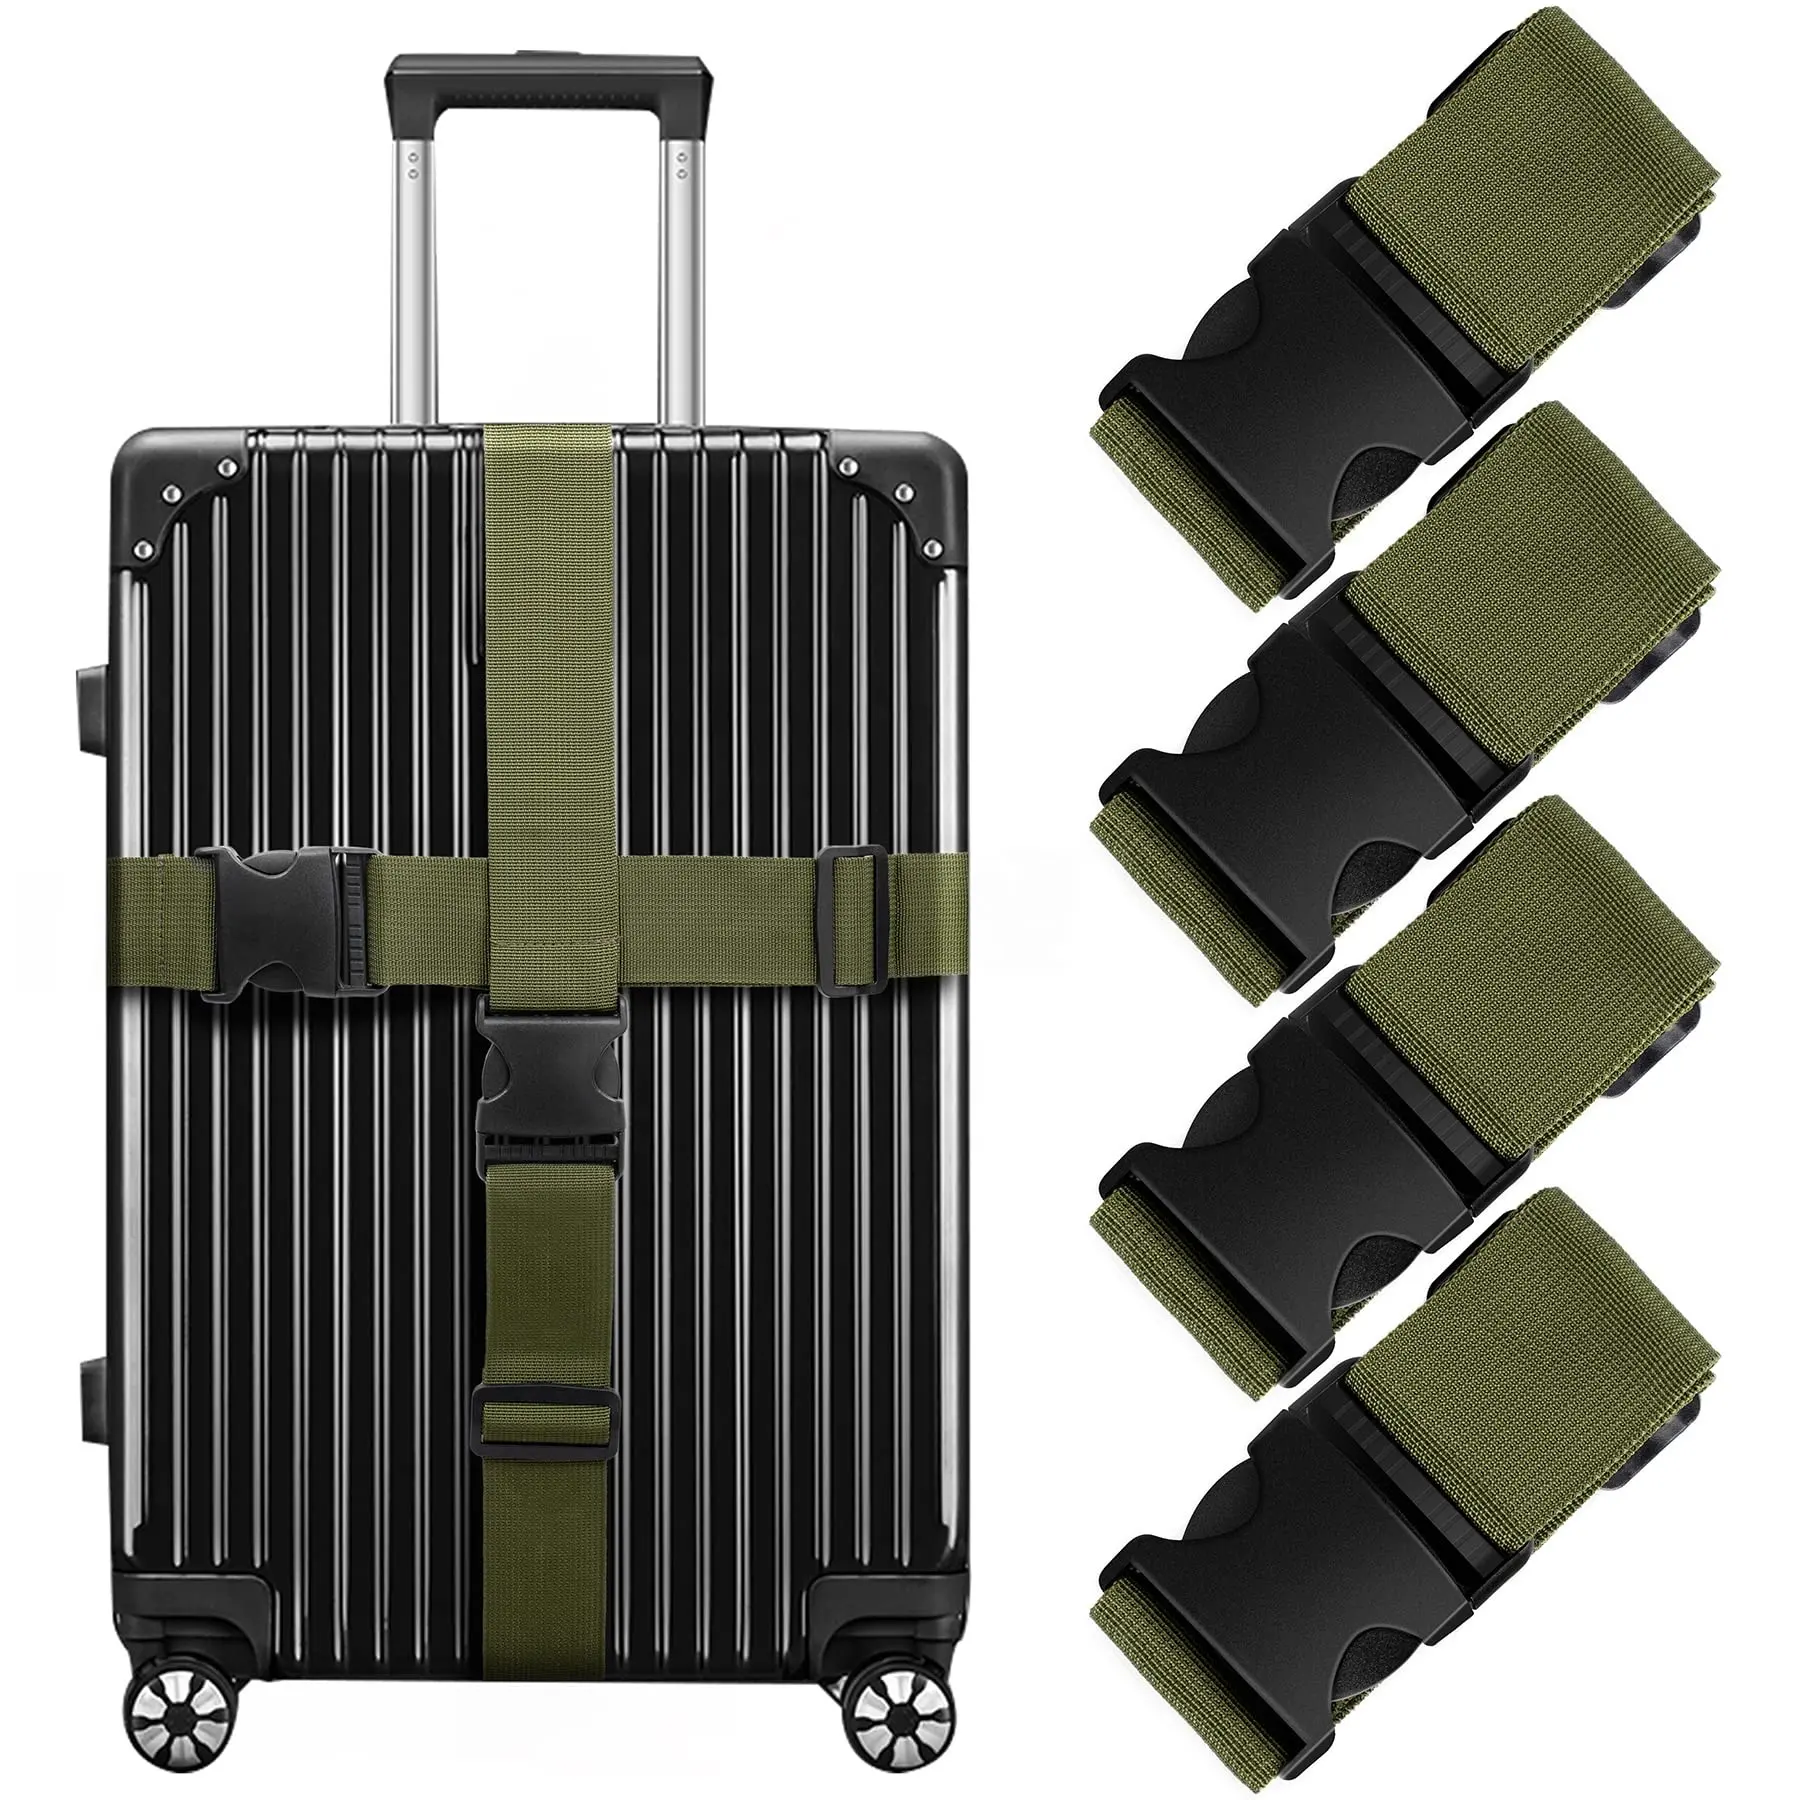 Luggage Straps for Suitcases Travel Belt Suitcase Strap Adjustable PP Travel Luggage Straps